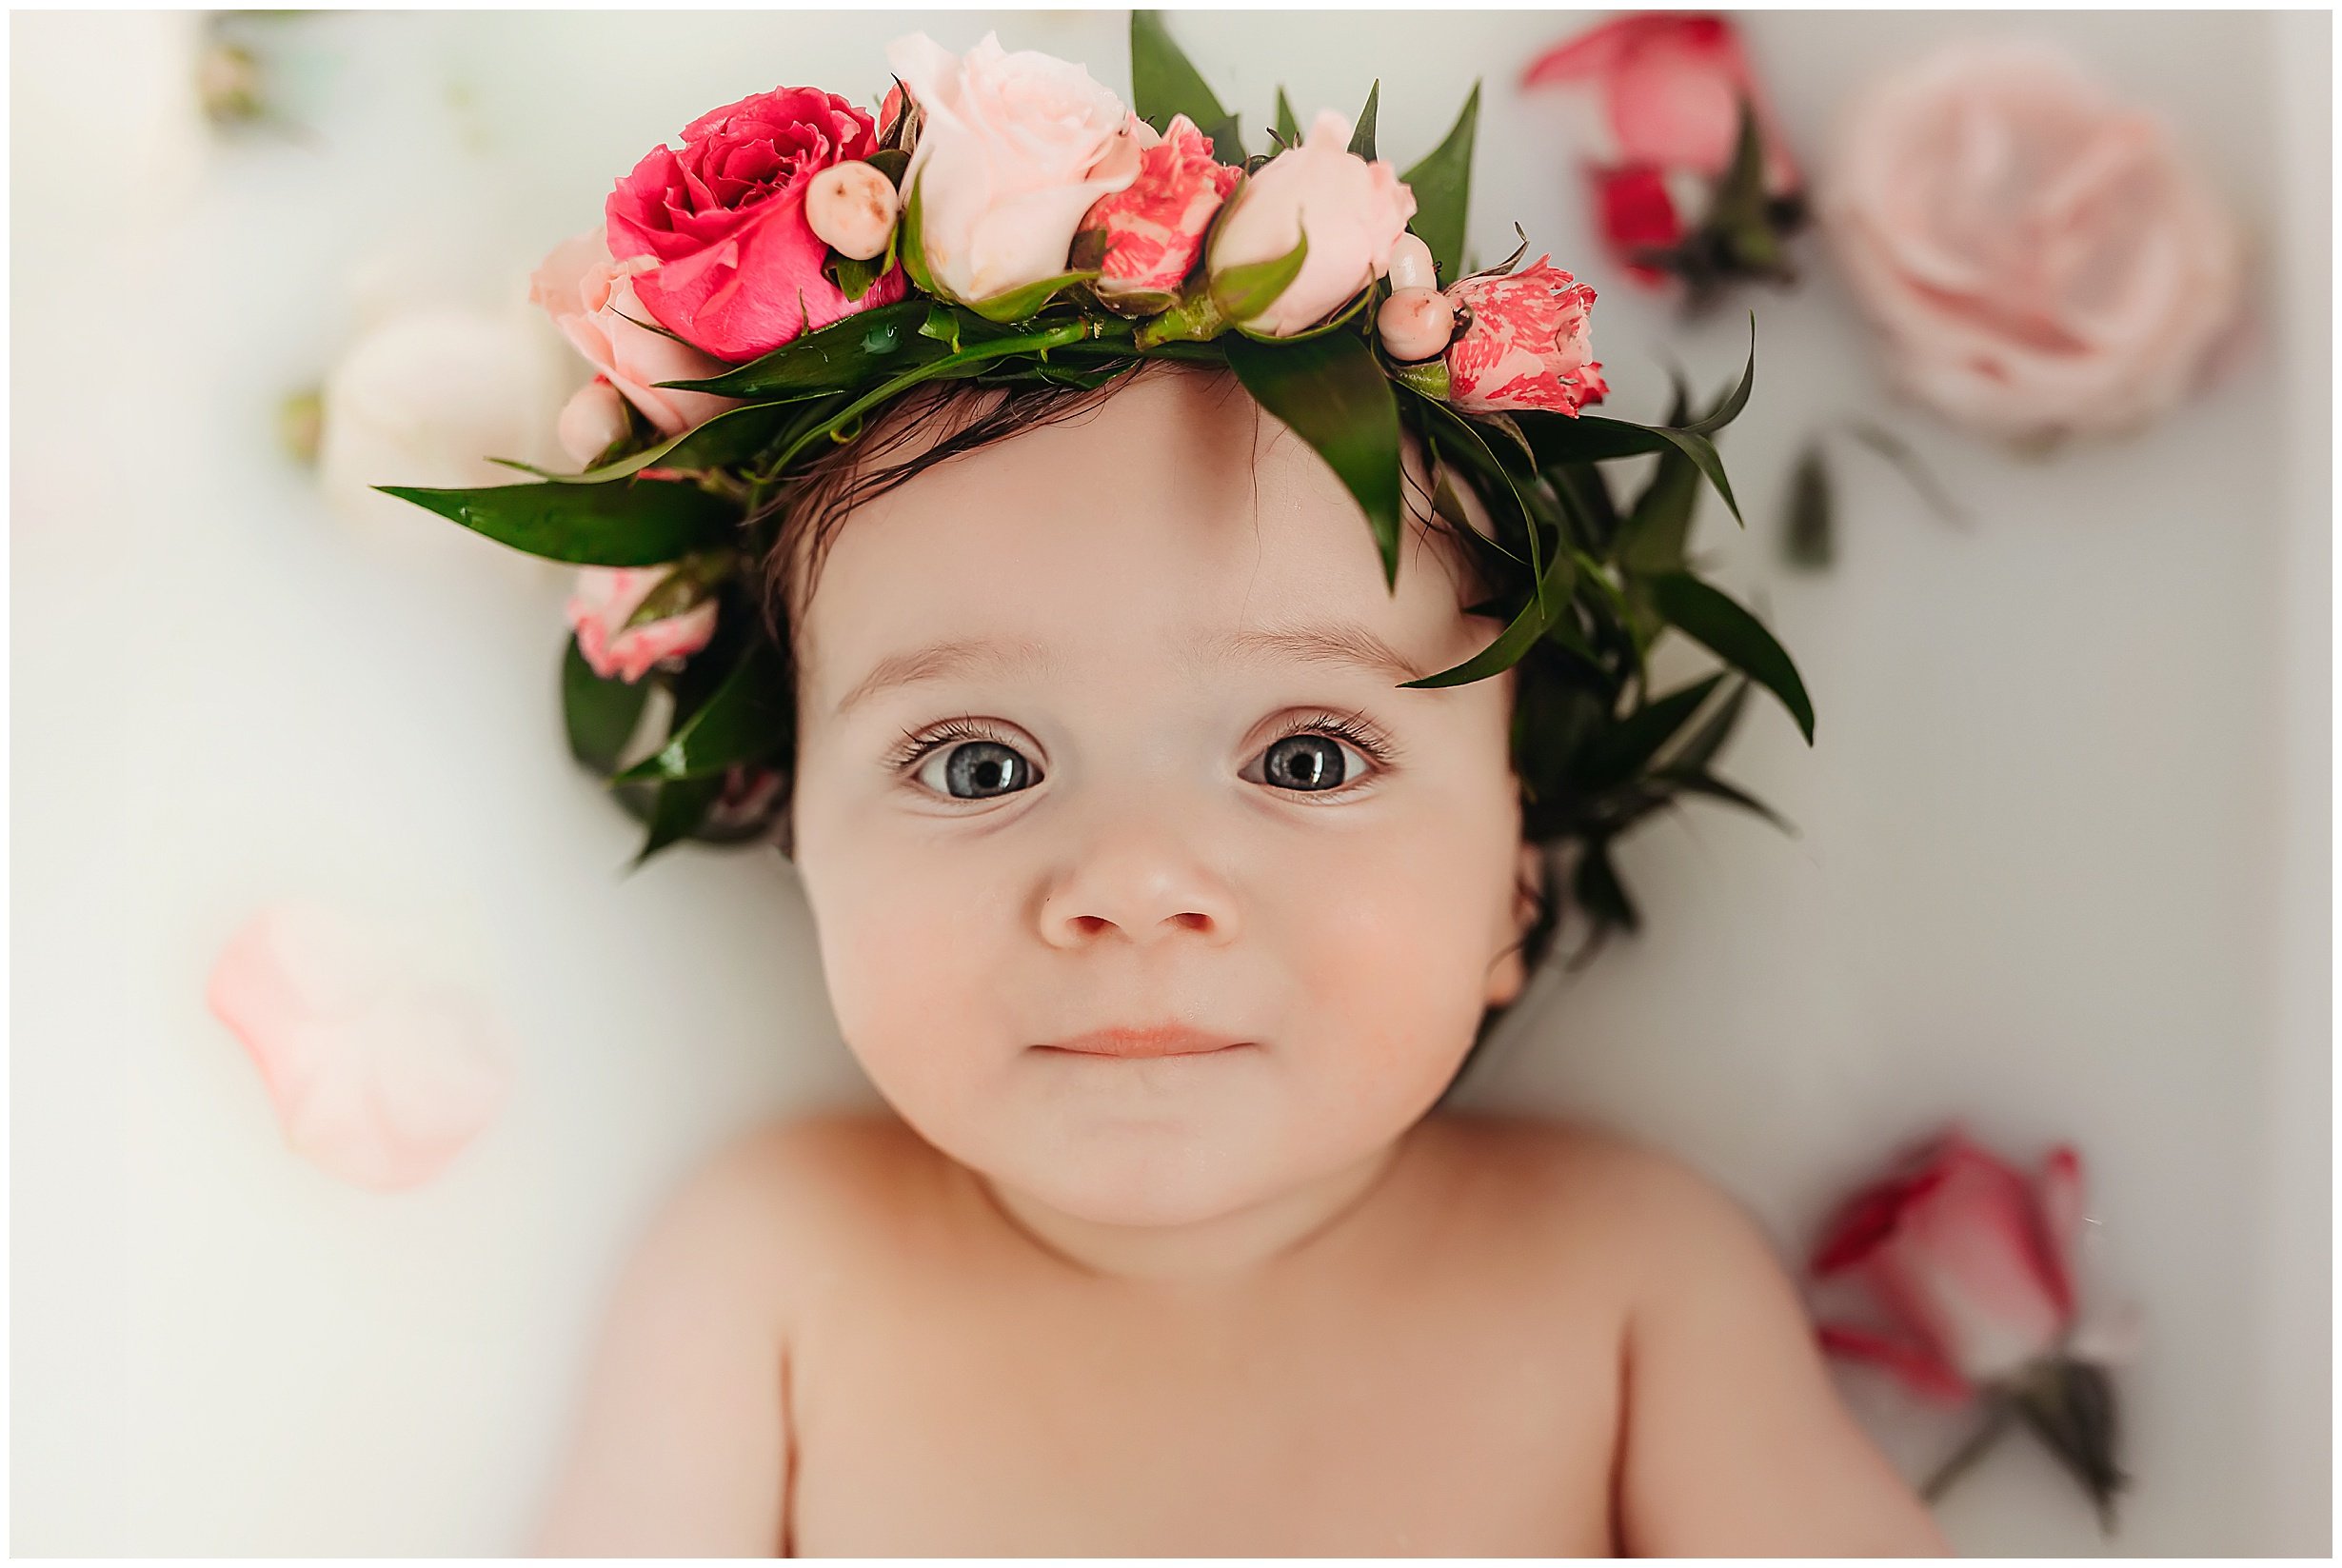 Baby girl enjoying a milk bath with a crown of flowers on her head